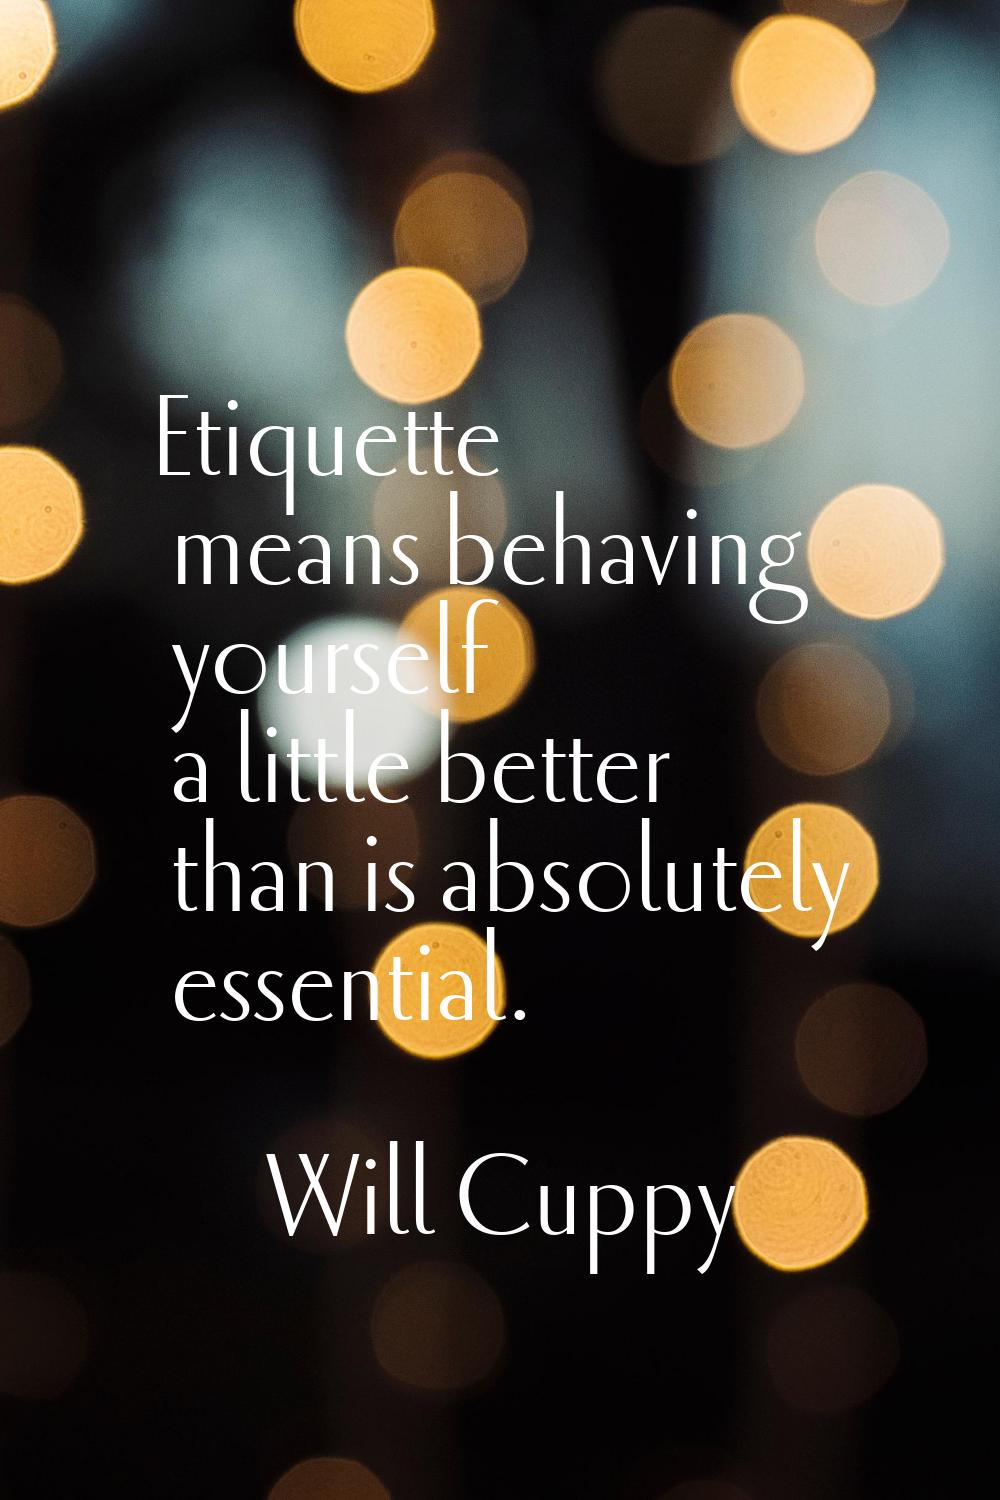 Etiquette means behaving yourself a little better than is absolutely essential.